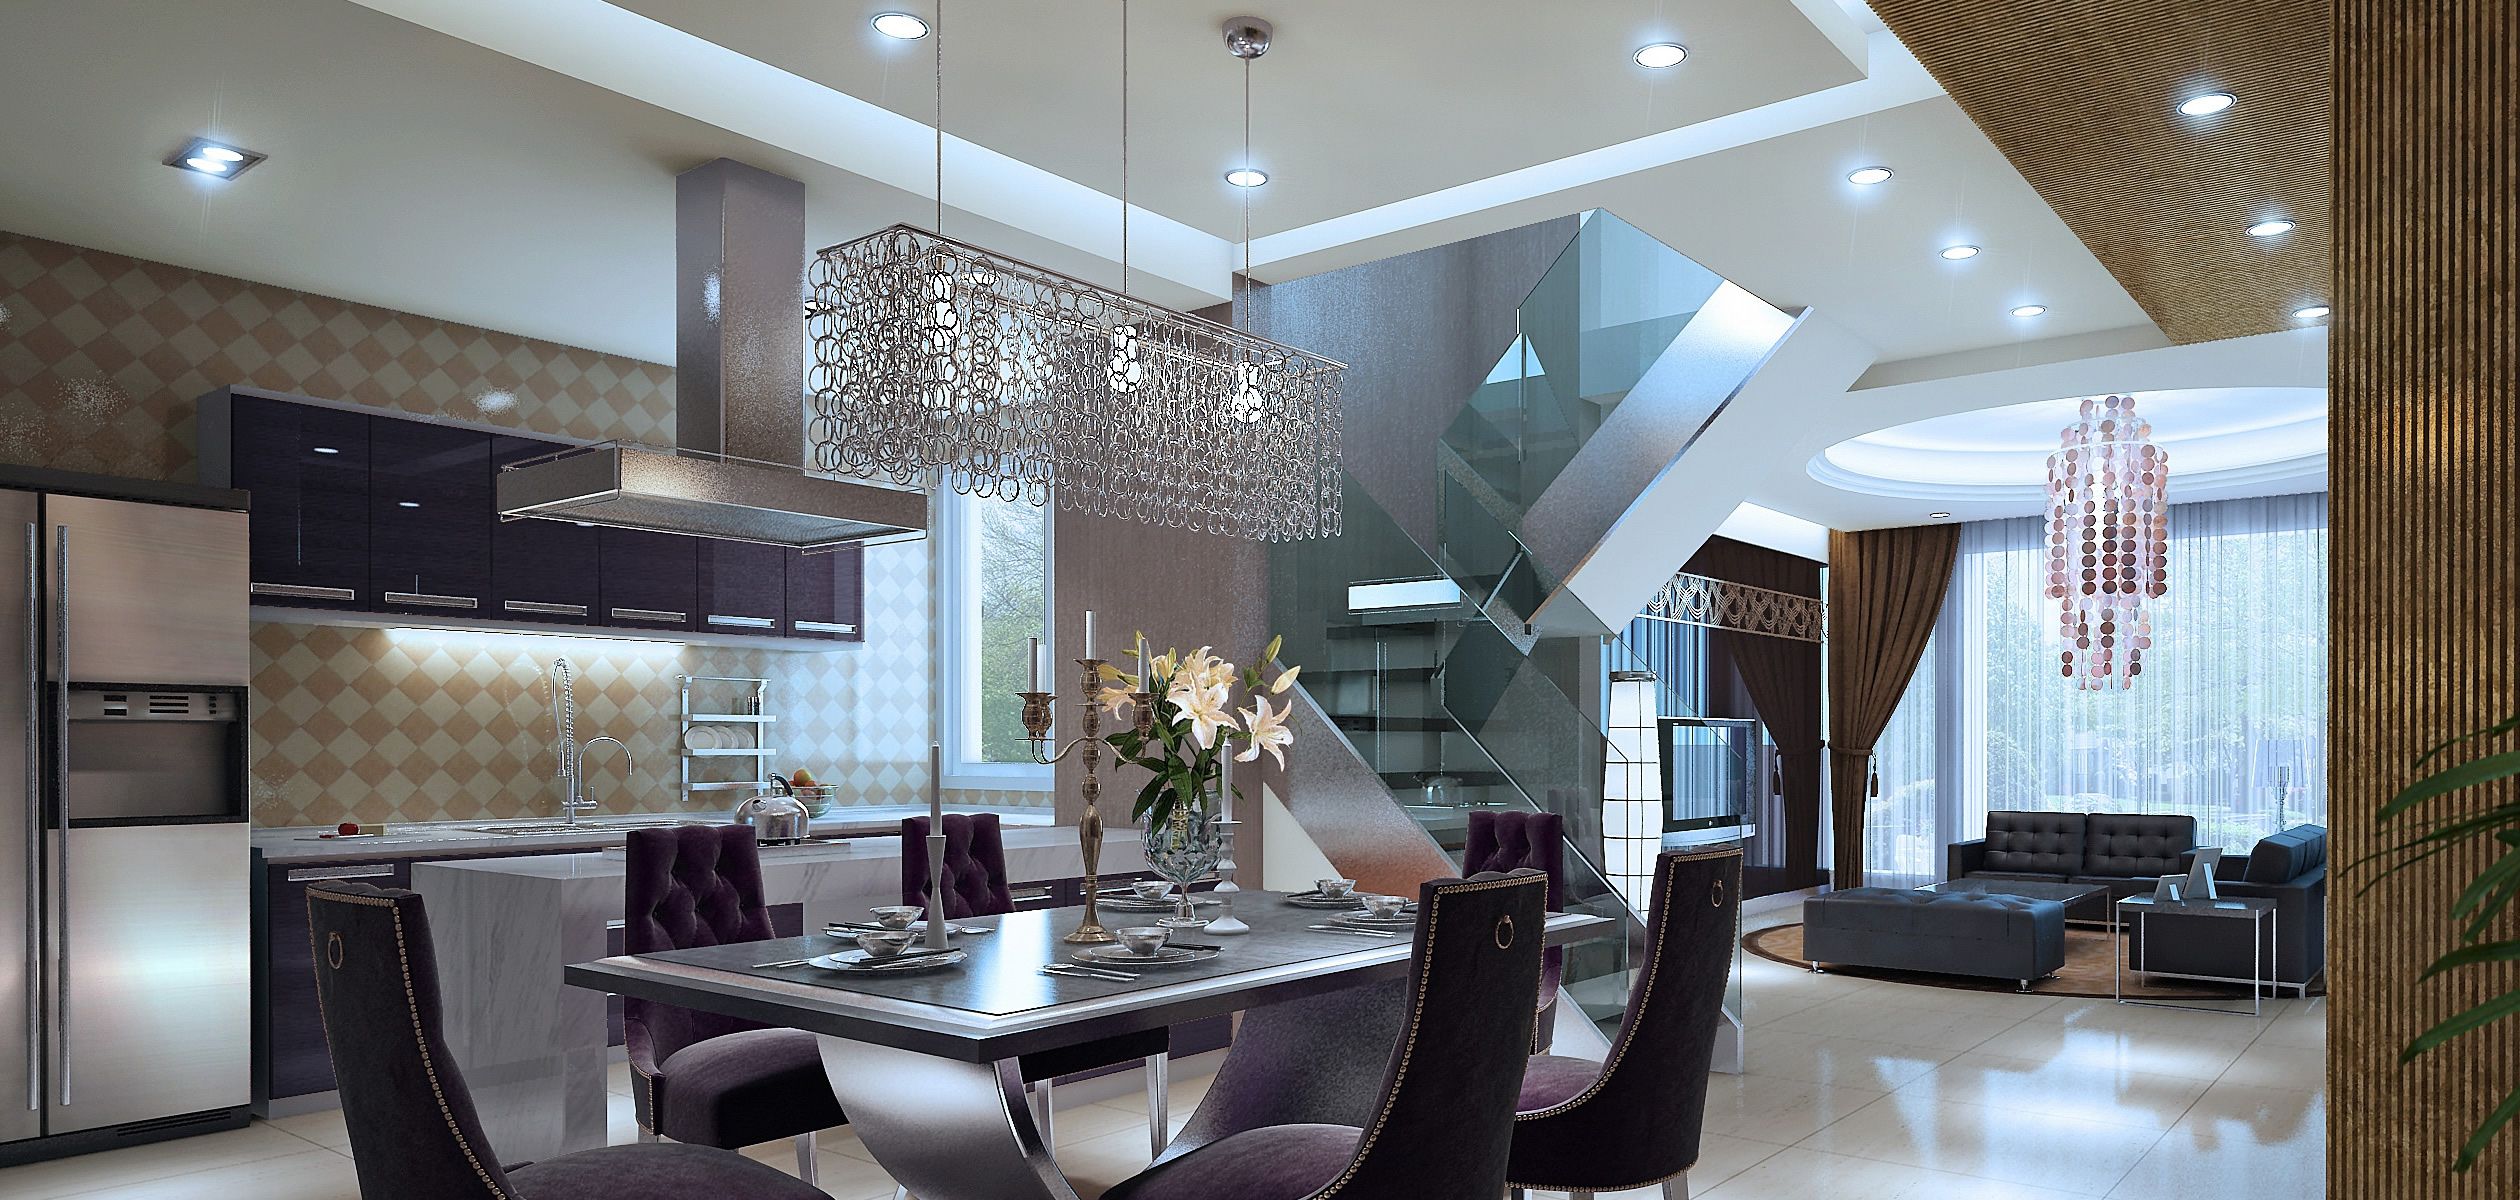 Modern home with Crestron technology and lighting